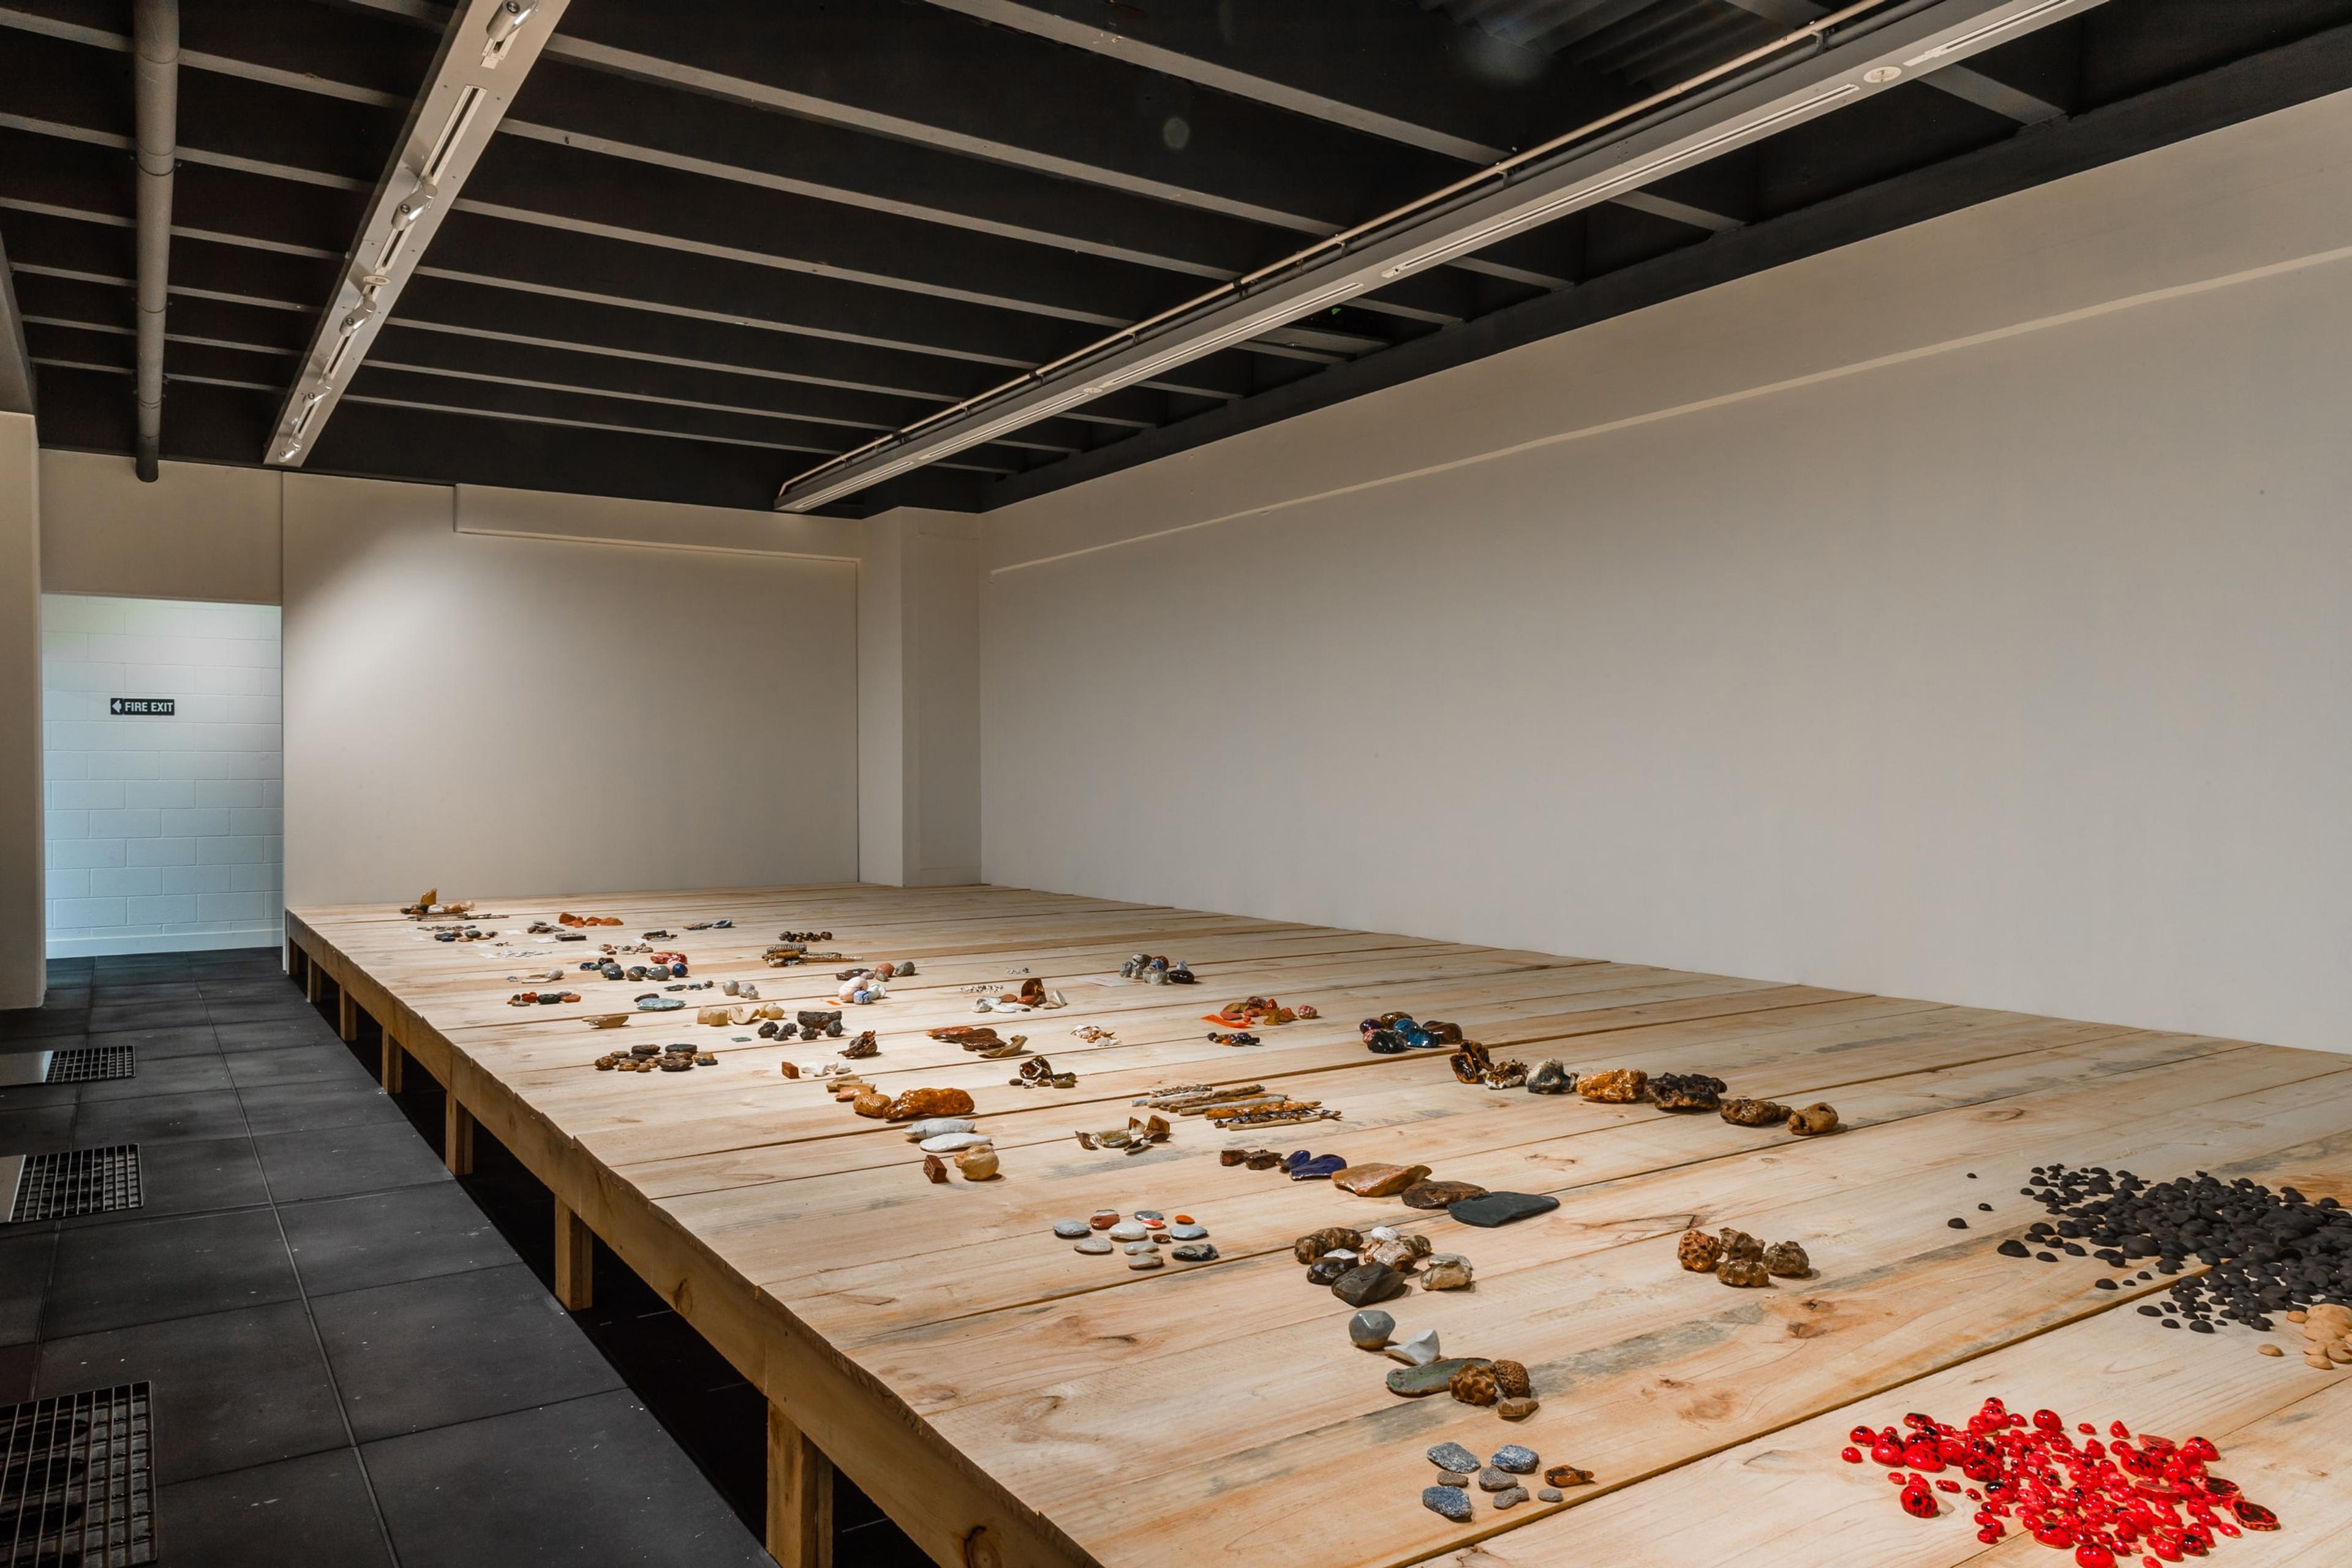 A wooden stage in a dimly lit white walled gallery, covered with groups of small objects